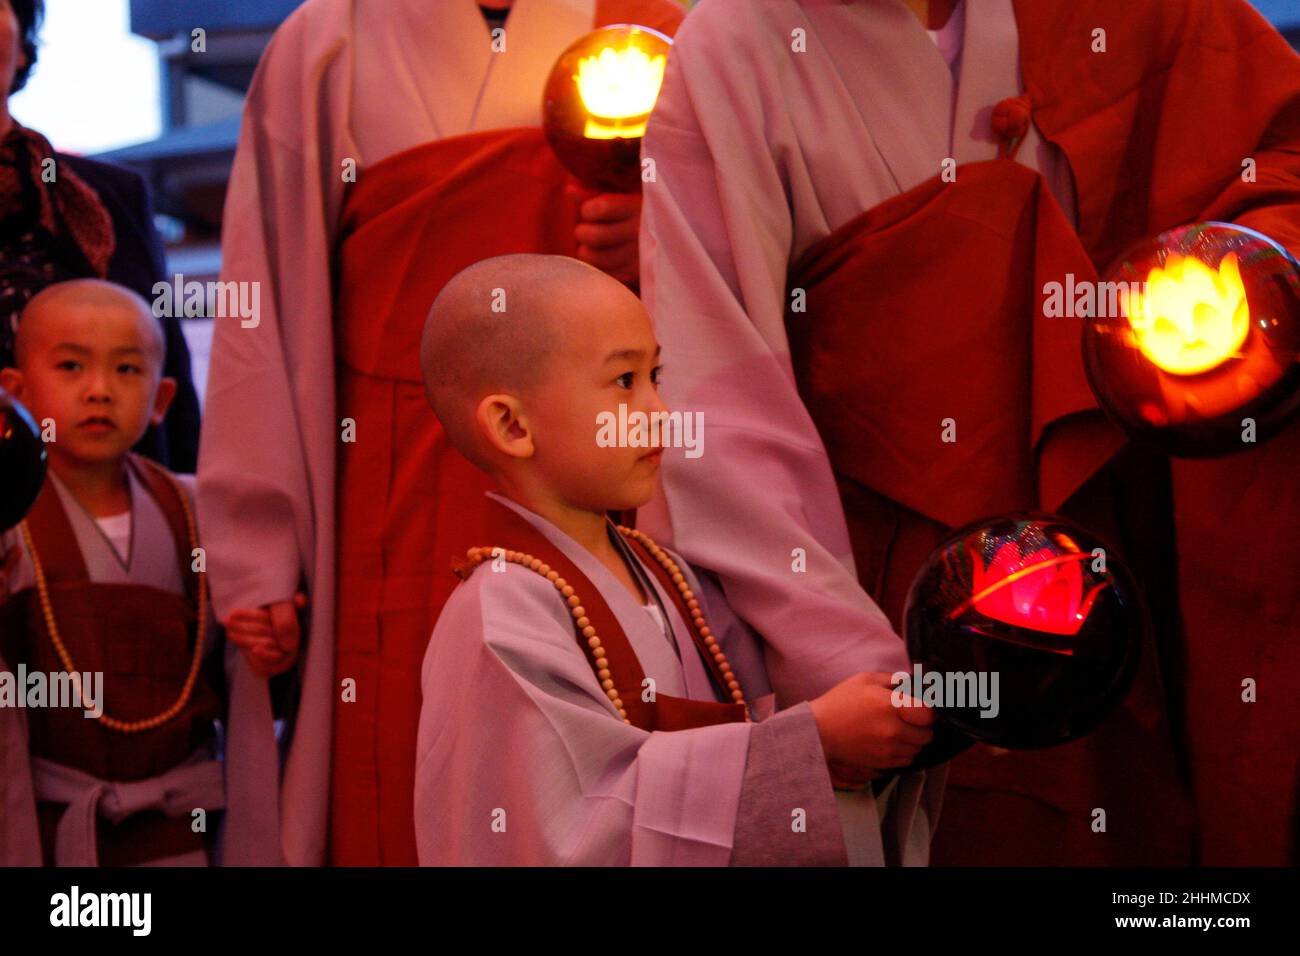 May 13, 2015 - South Korea, Seoul : Little Monks hold lanterns during a lighting ceremony to celebrate Buddha's upcoming birthday on May 25 at the Jogye Temple in Seoul, South Korea Wednesday, May 13, 2015.Nine children entered the temple to have an experience of monks' life for two weeks. (Ryu Seung-il / Polaris) Stock Photo